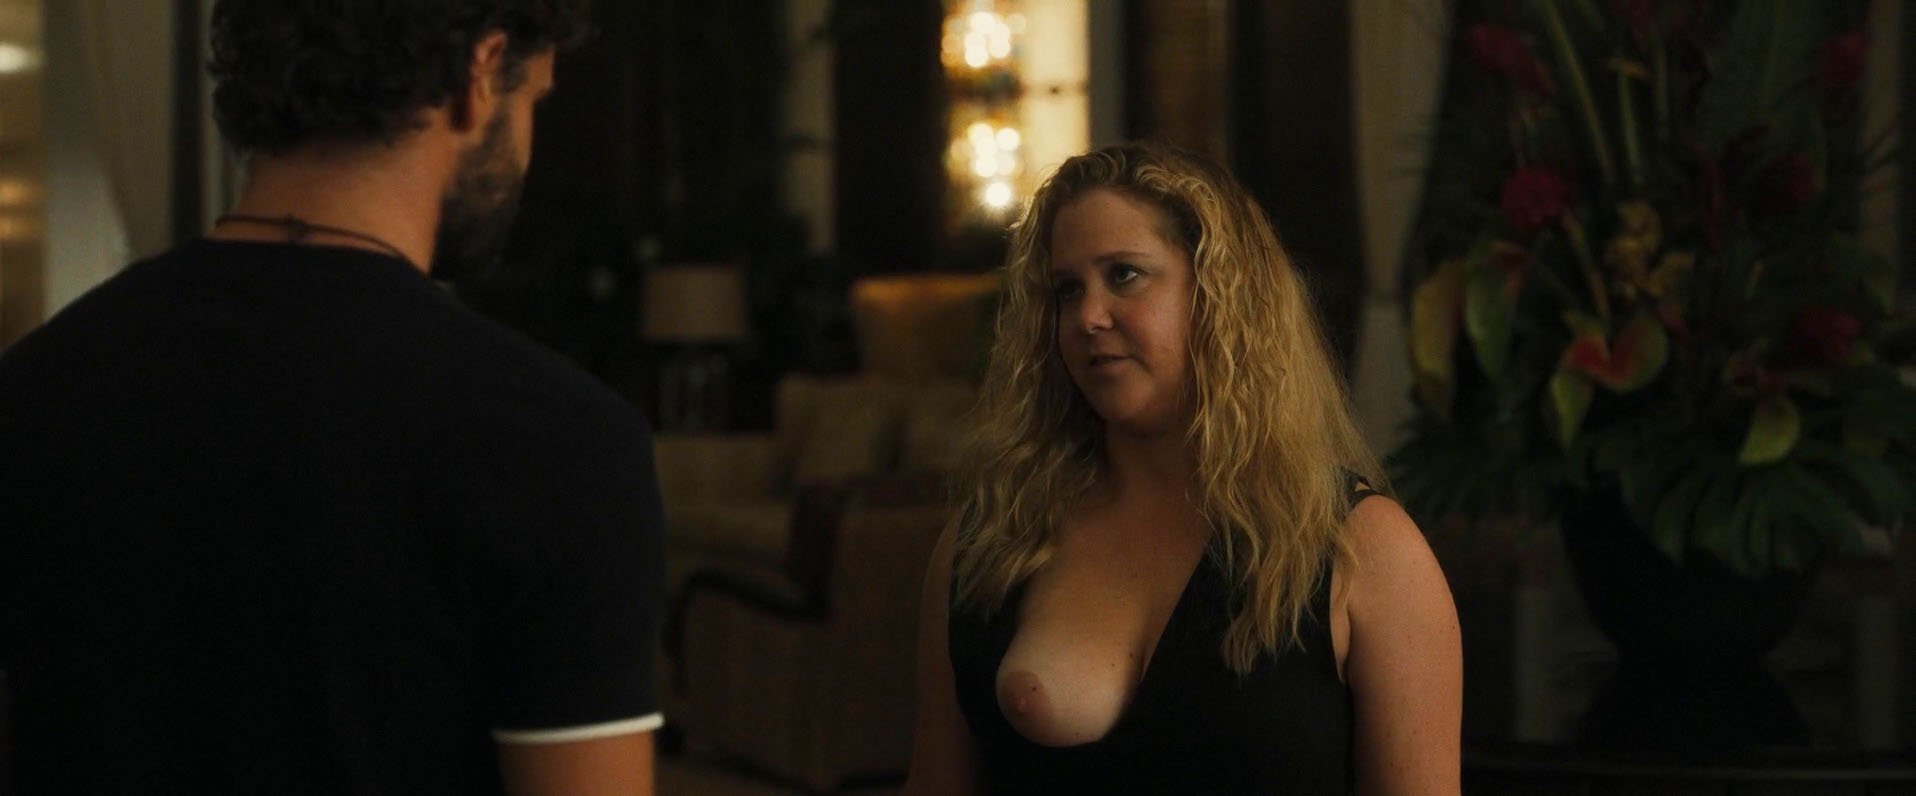 Amy Schumer - Snatched (2017) HD 1080p